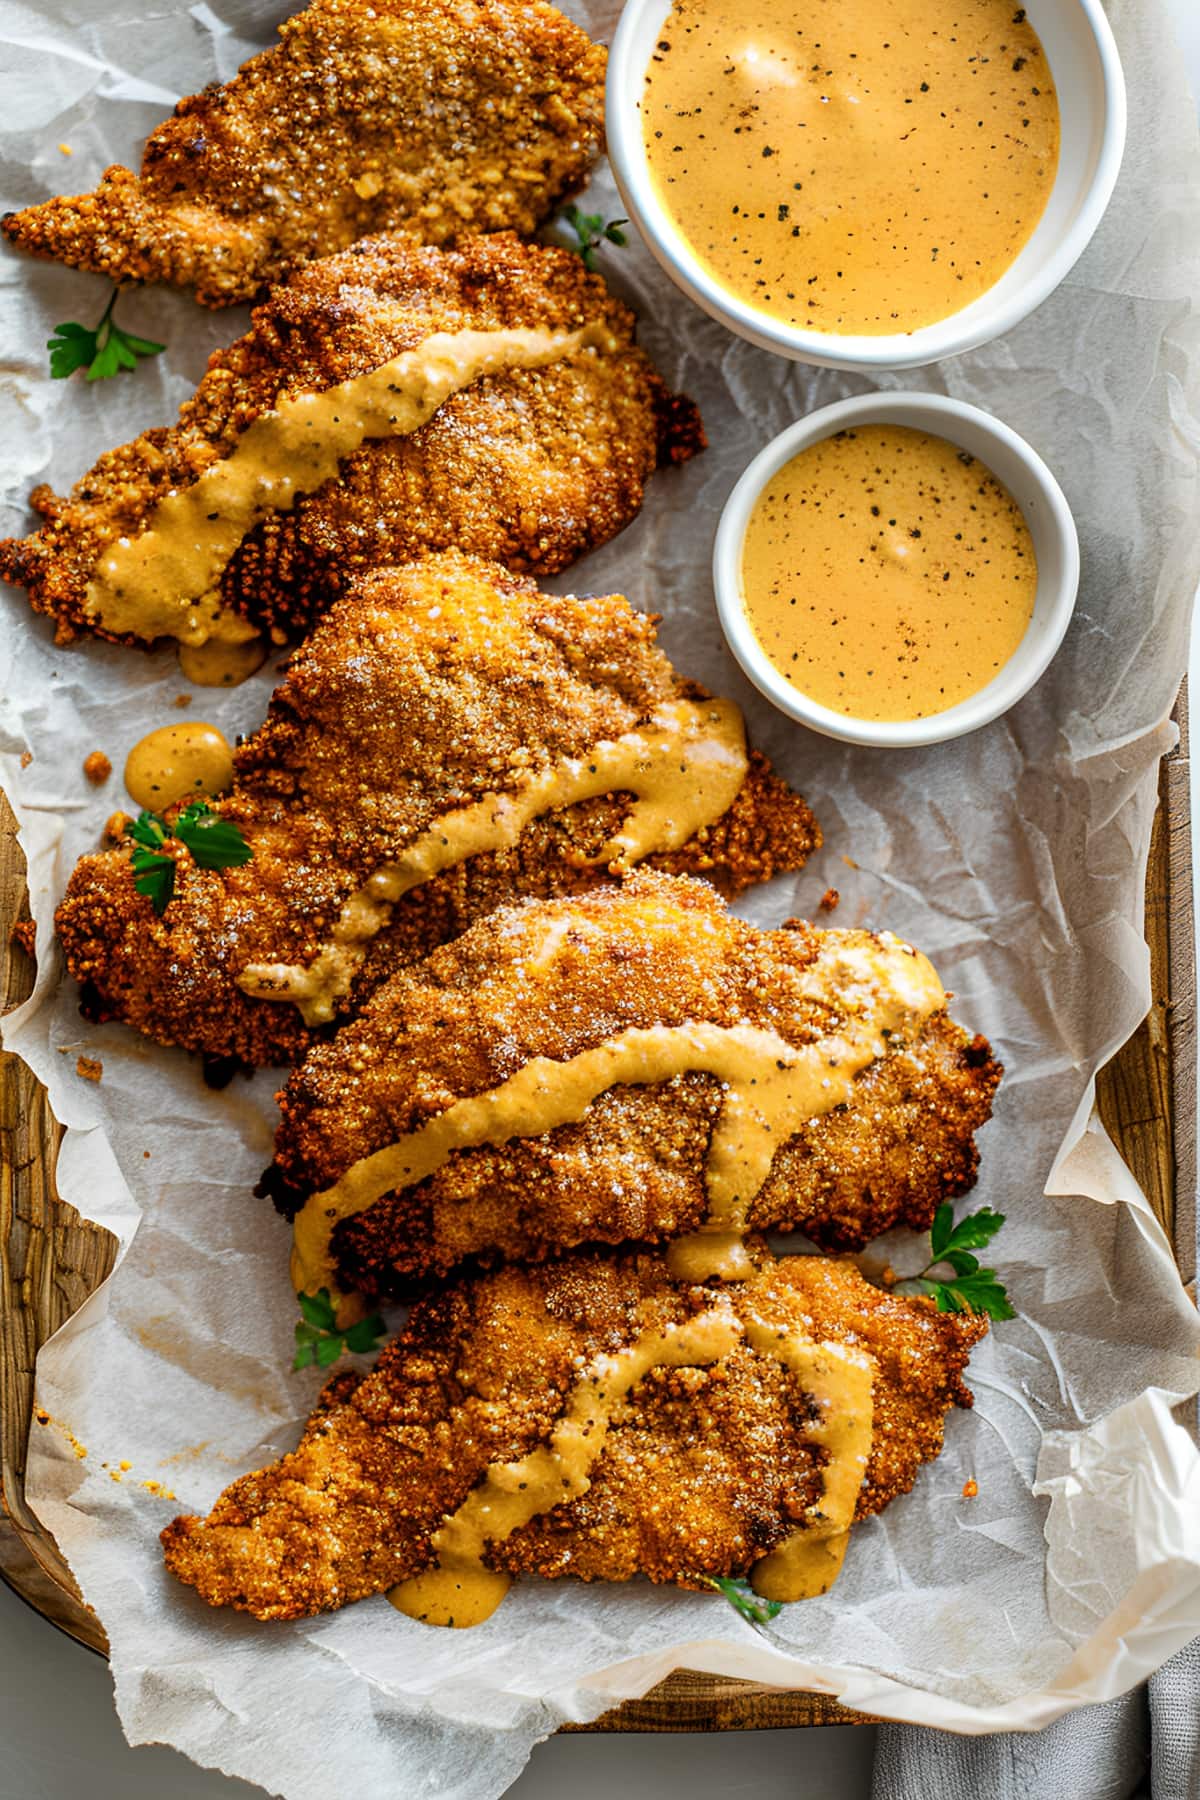 Juicy and golden homemade fried chicken cutlets